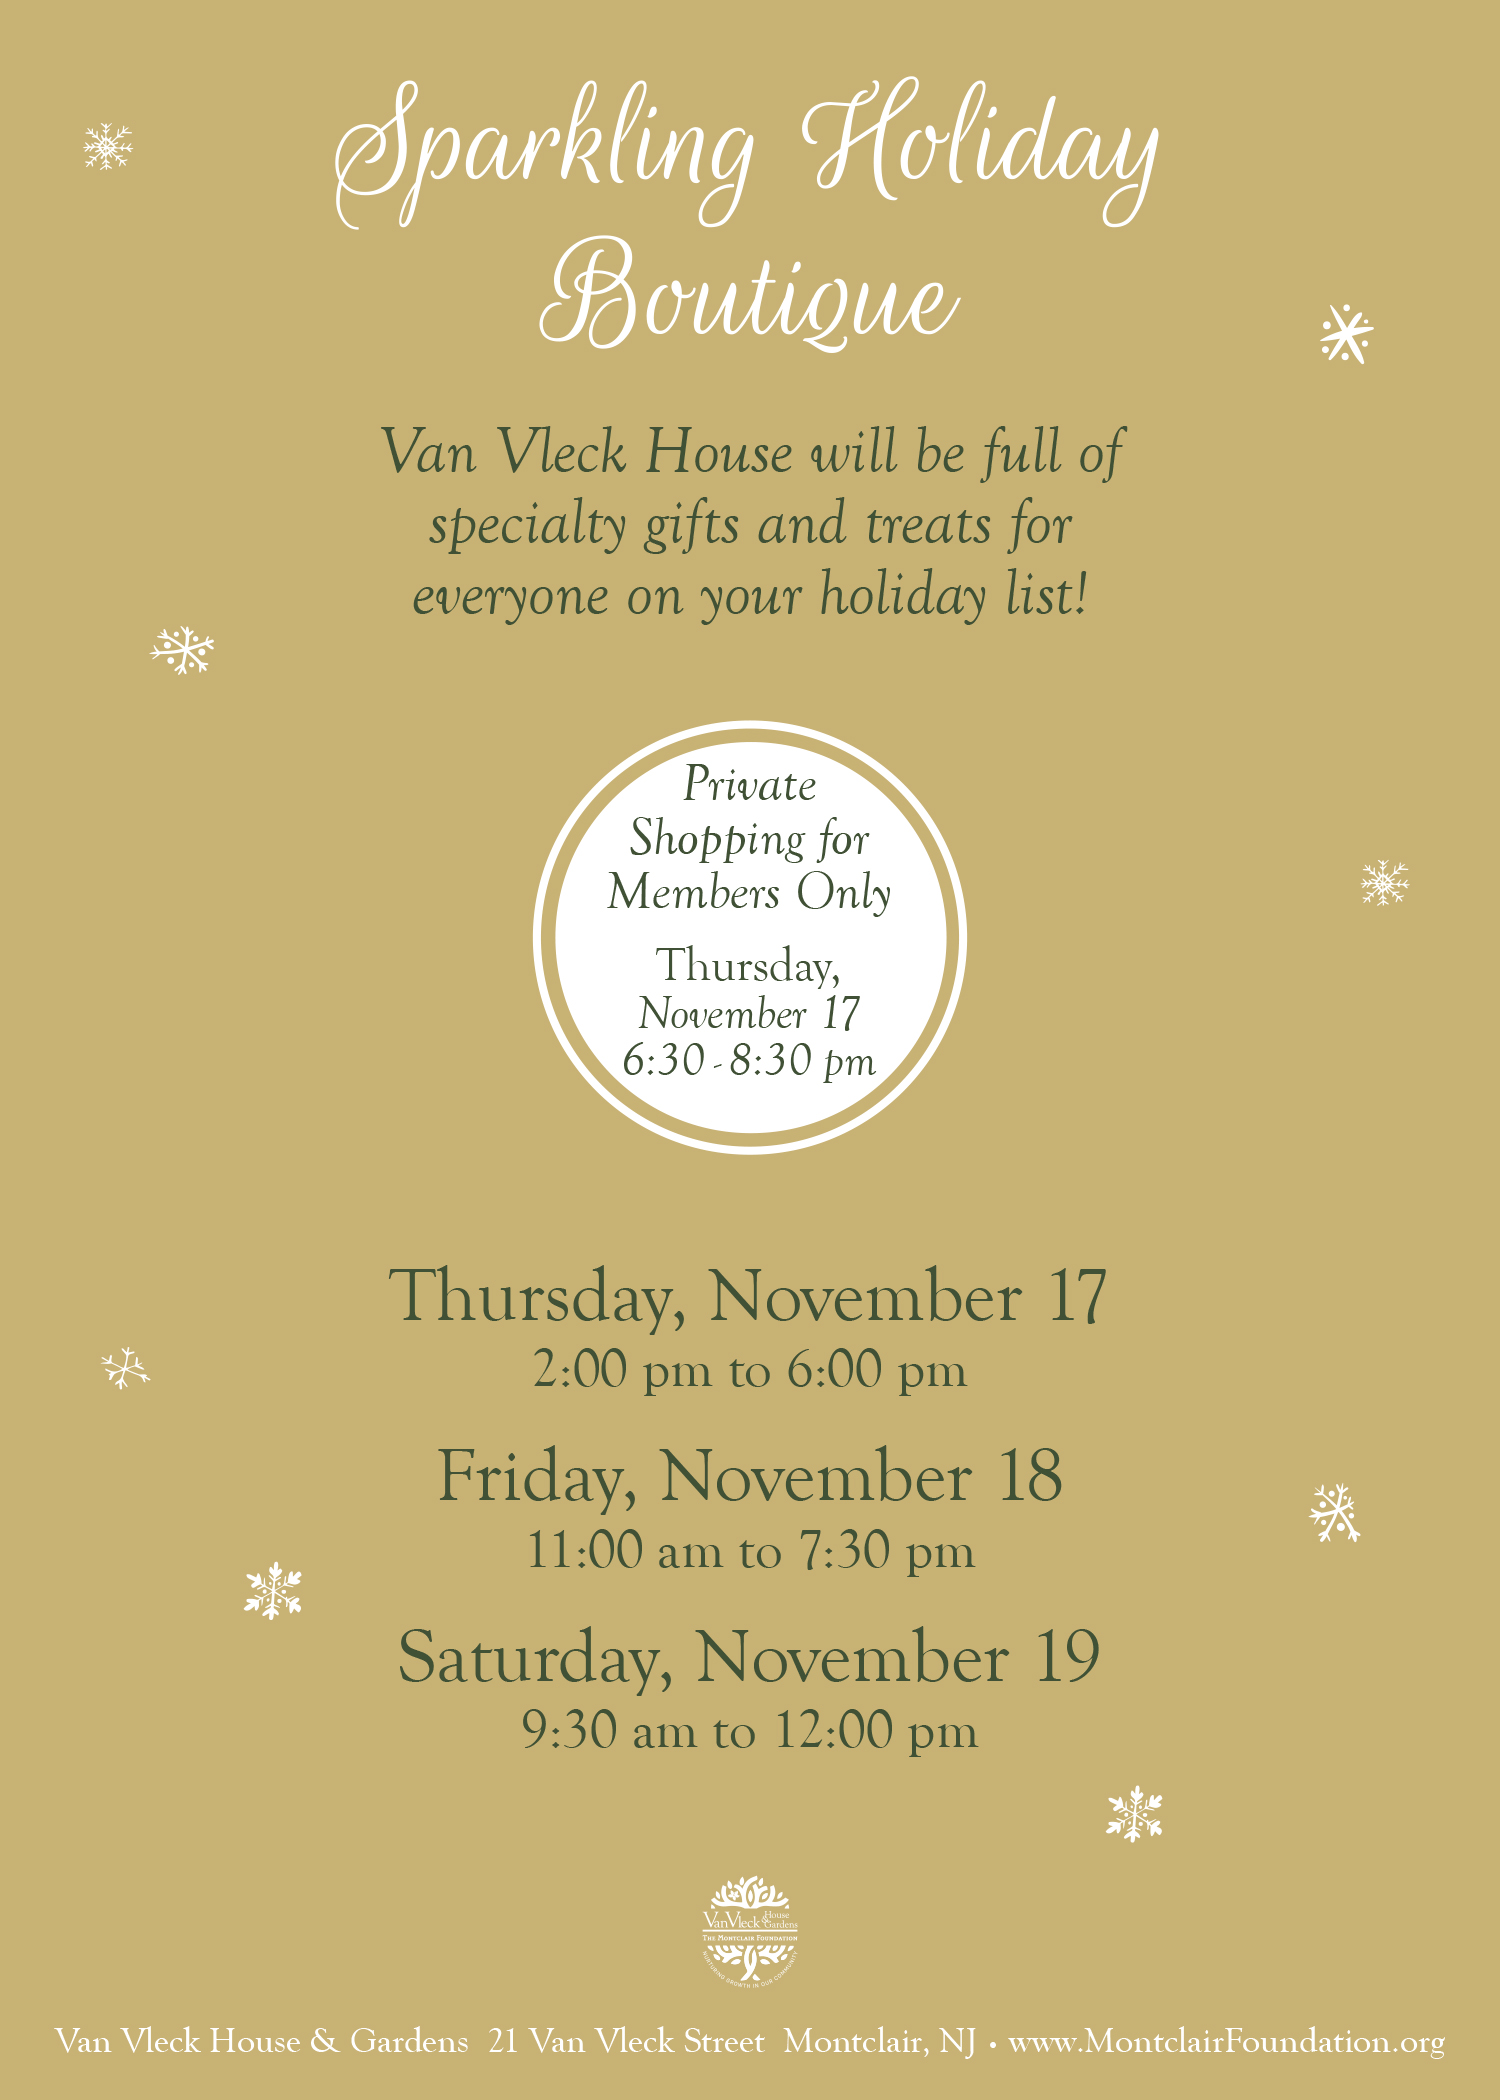 Holiday Events at Van Vleck - Sparkling Holiday Boutique - The Montclair  Foundation